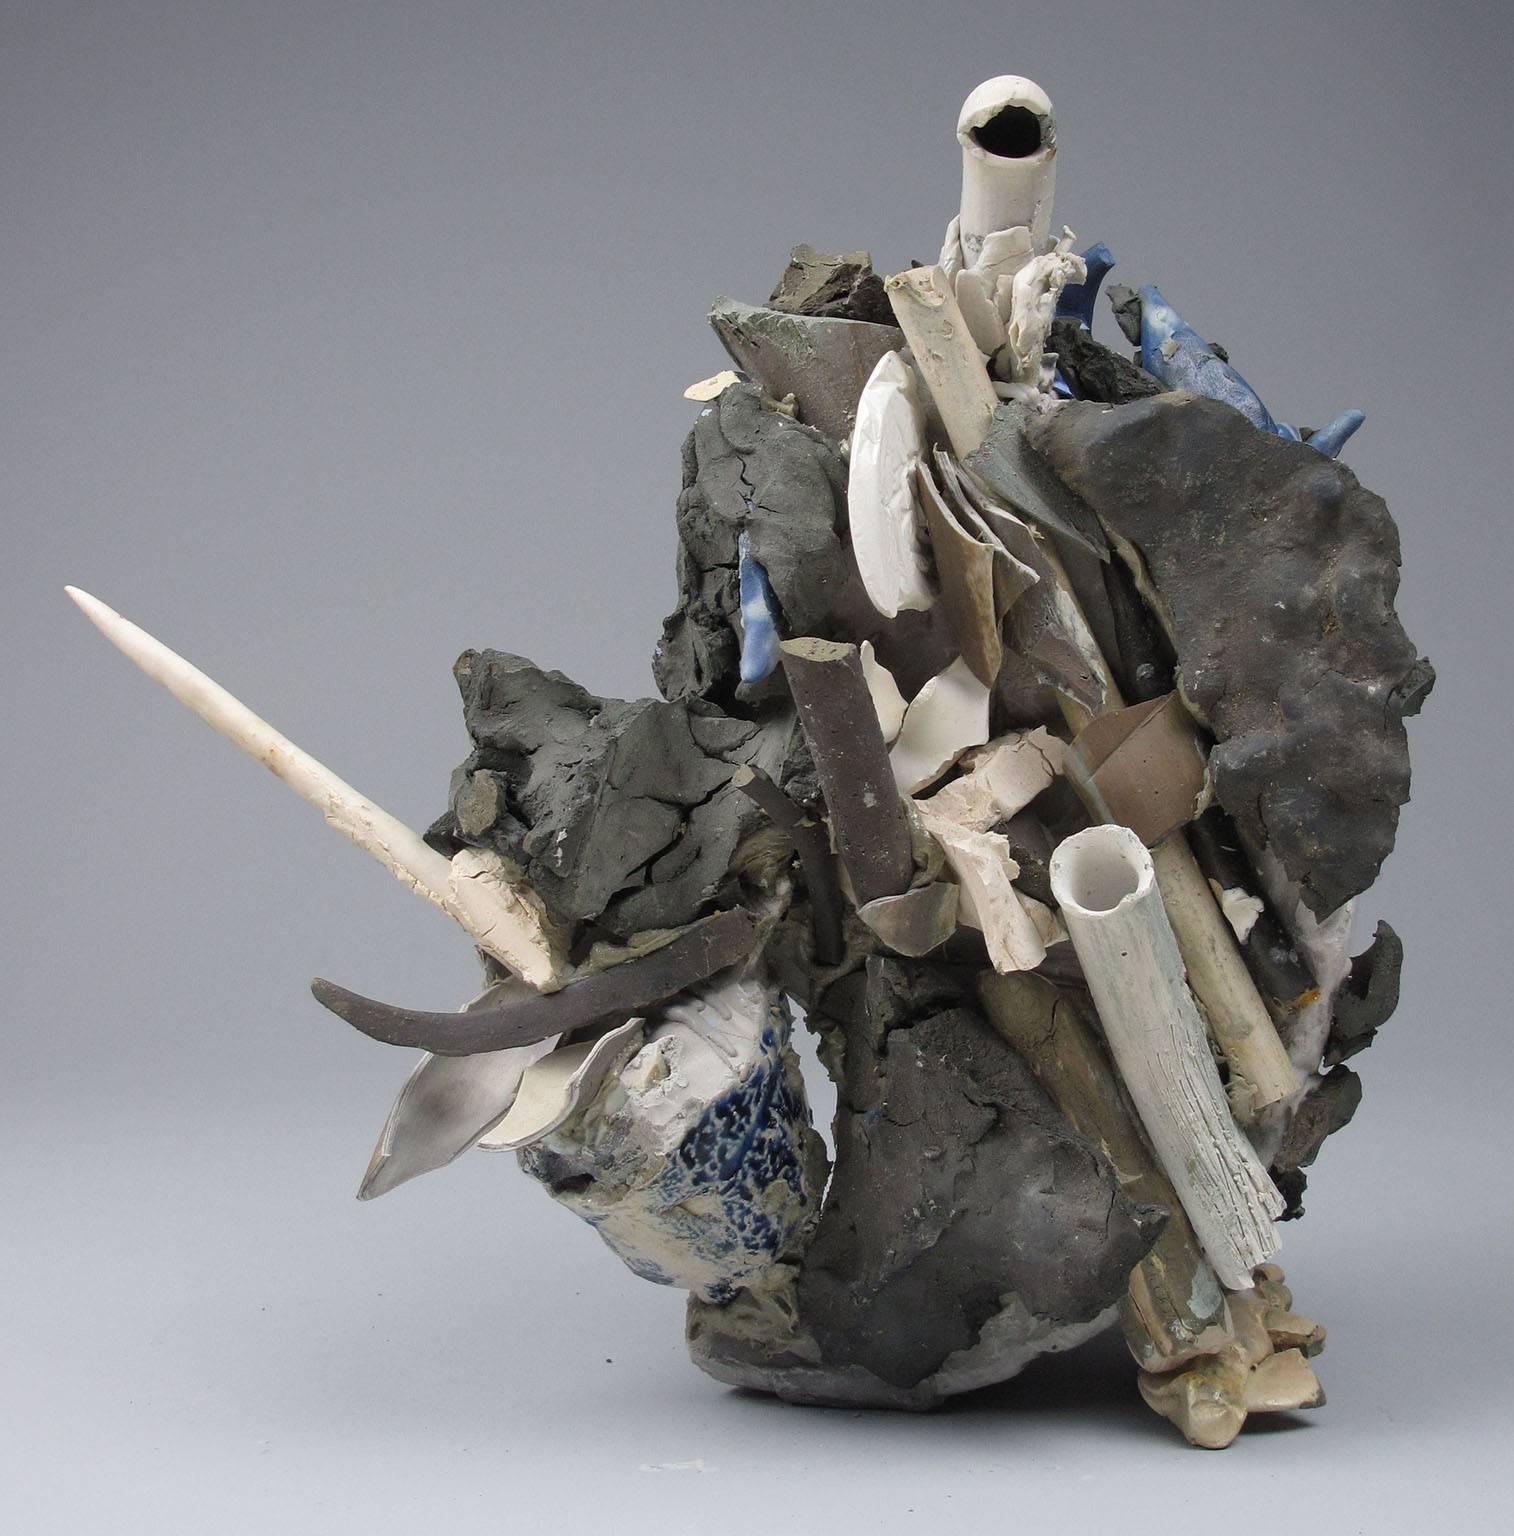 Sara Fine-Wilson Abstract Sculpture - "Coming Up For Air", abstract, ceramic, mixed media, earth tones, sculpture